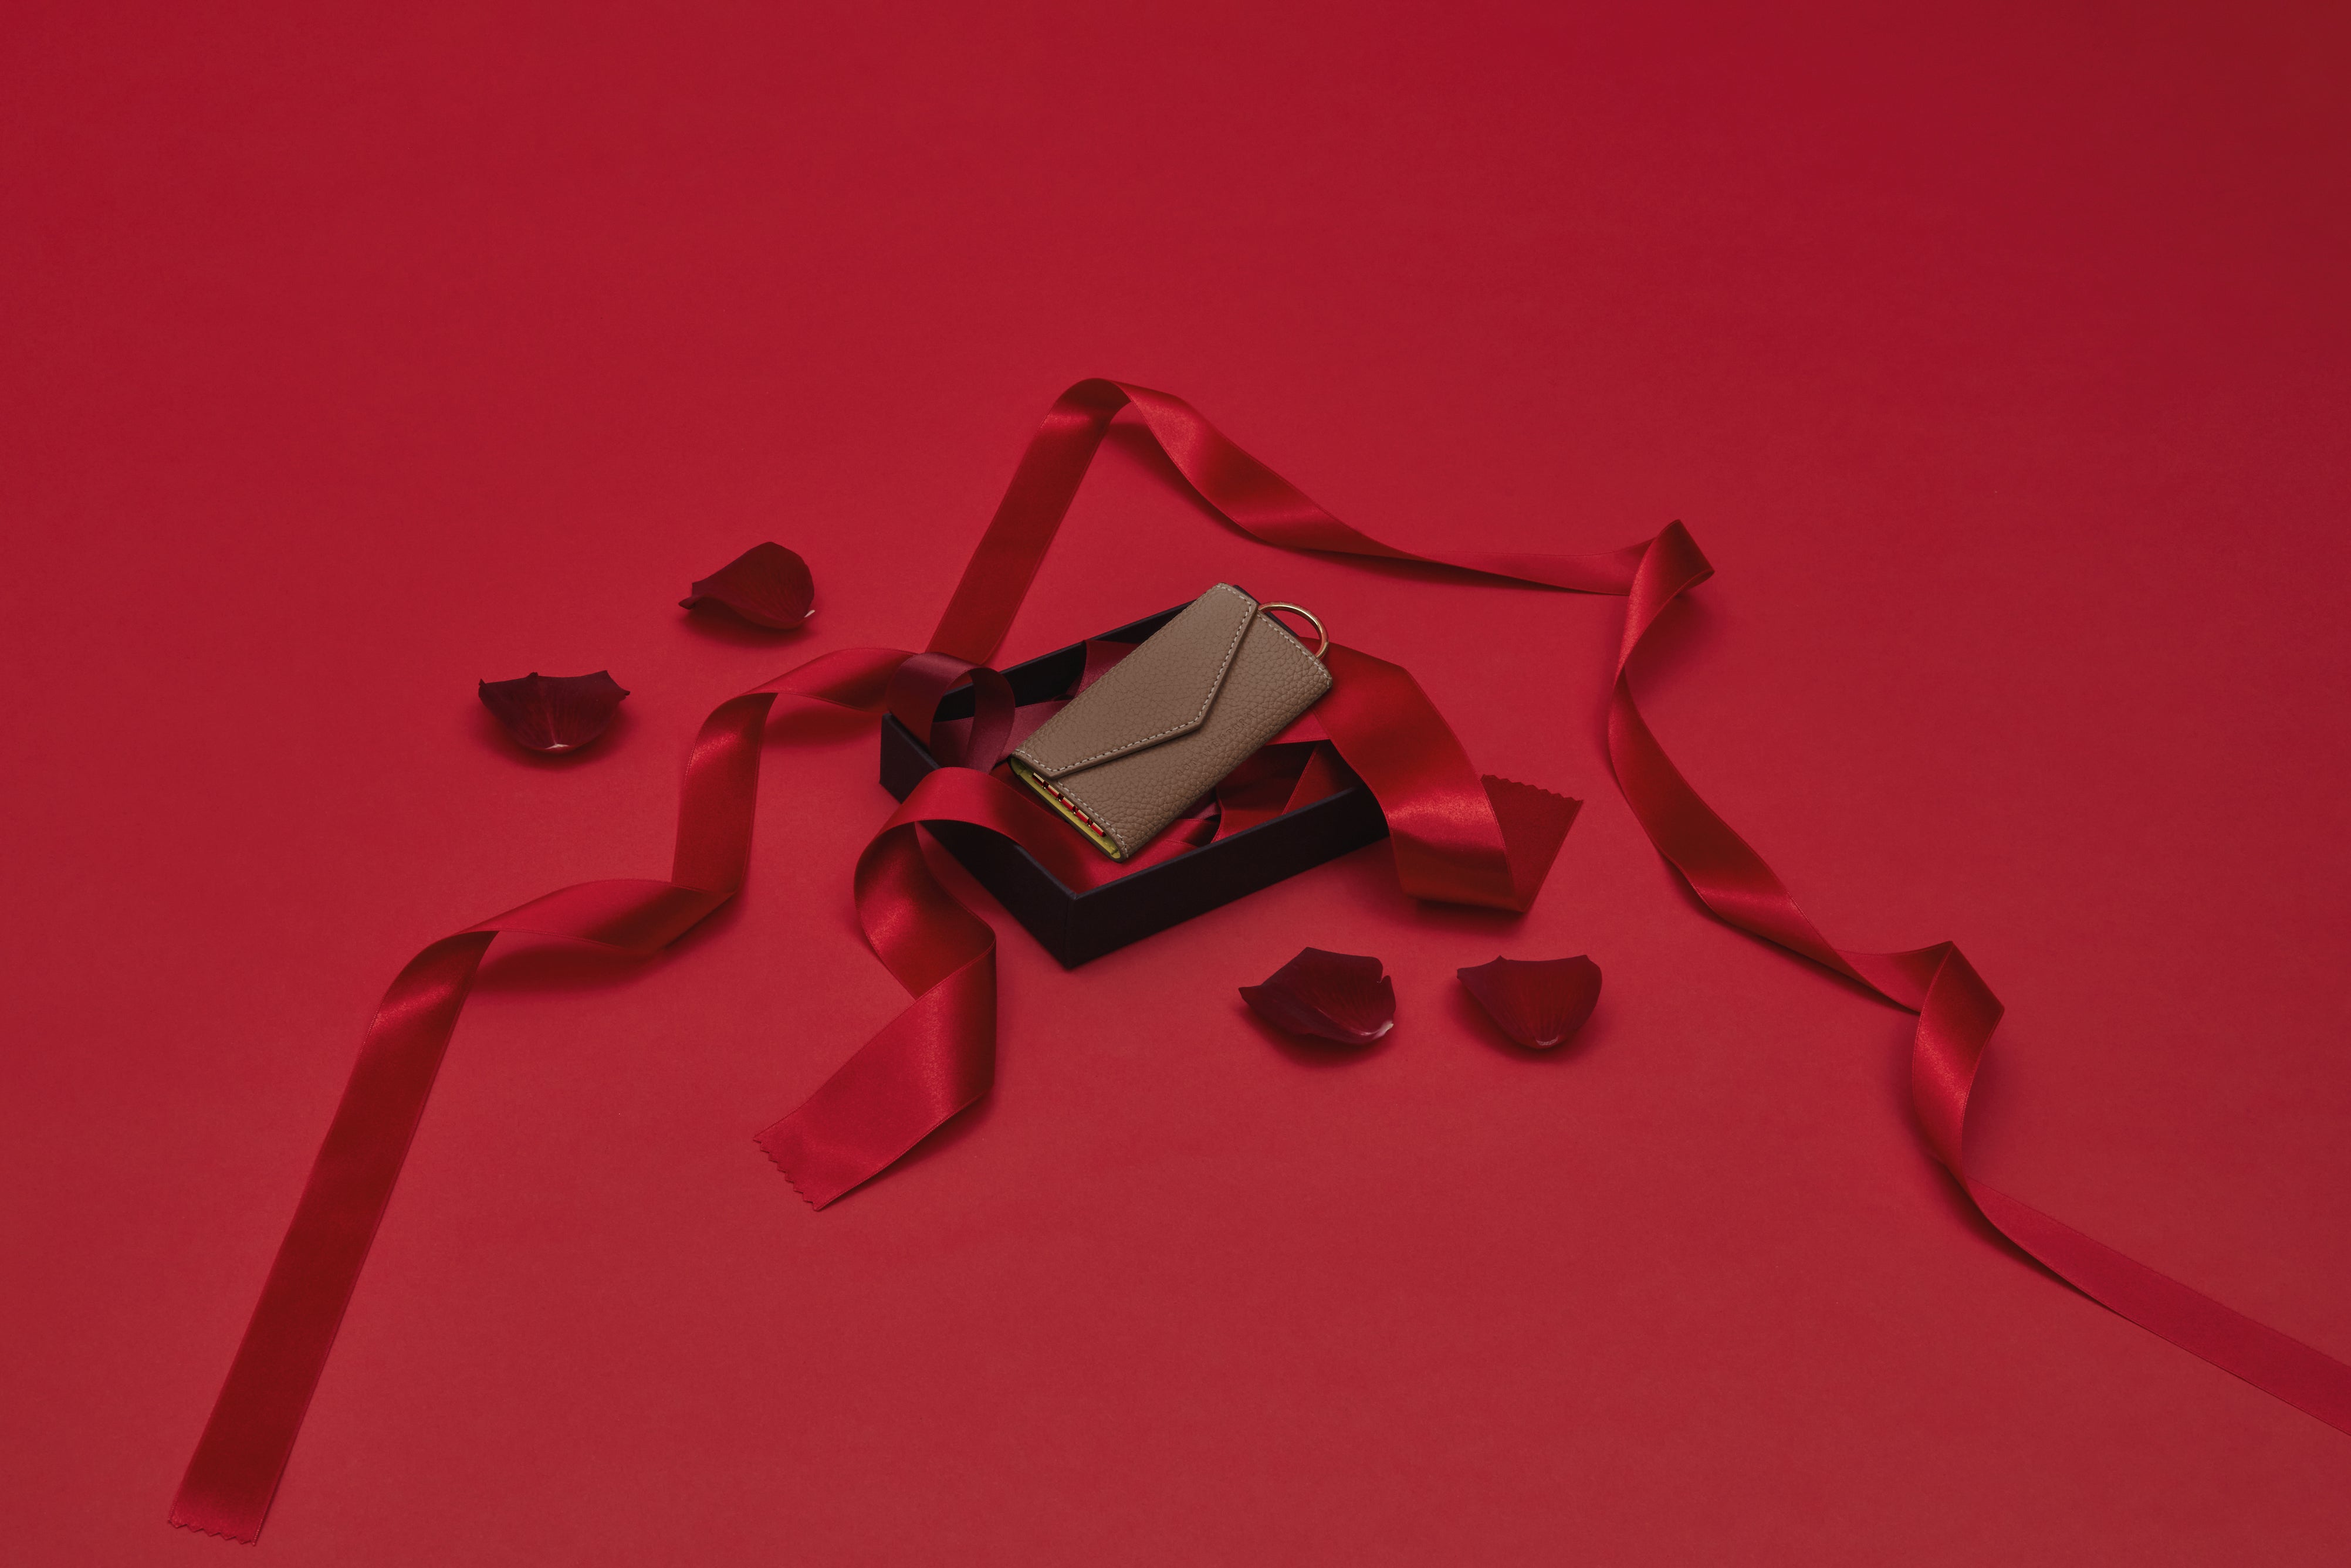 Leather accessories from BONAVENTURA that make the perfect Valentine's Day gift.